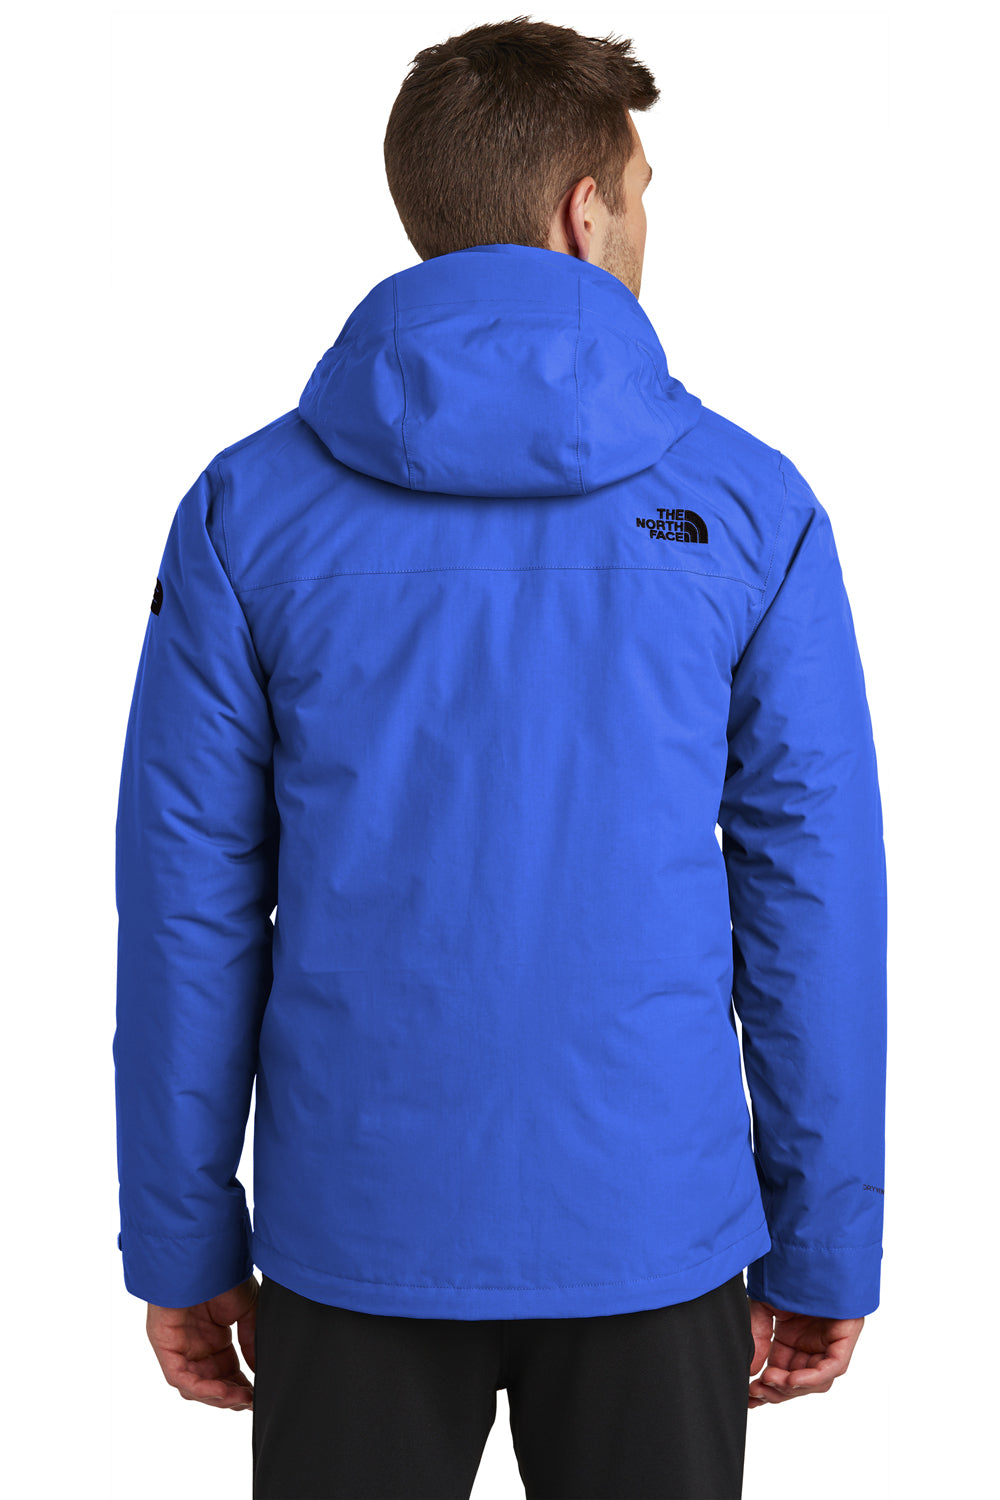 The North Face NF0A3VHR Mens Traverse Triclimate 3-in-1 Waterproof Full Zip Hooded Jacket Monster Blue Back